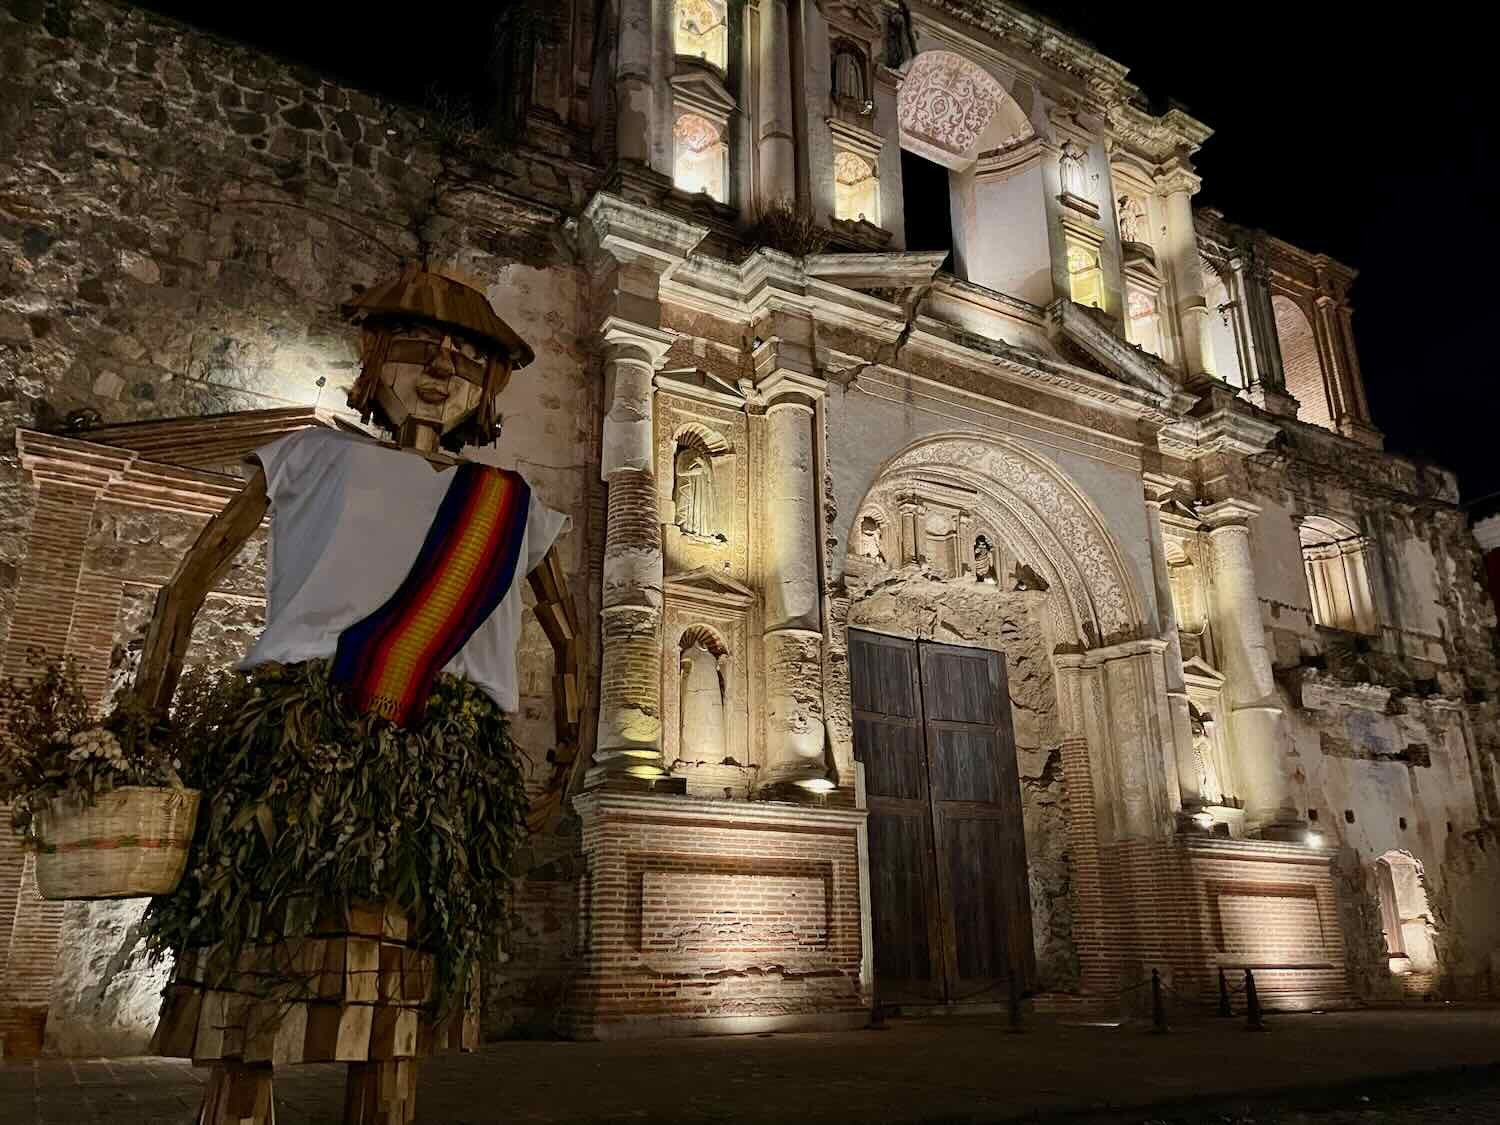 Statue in the courtyard at night